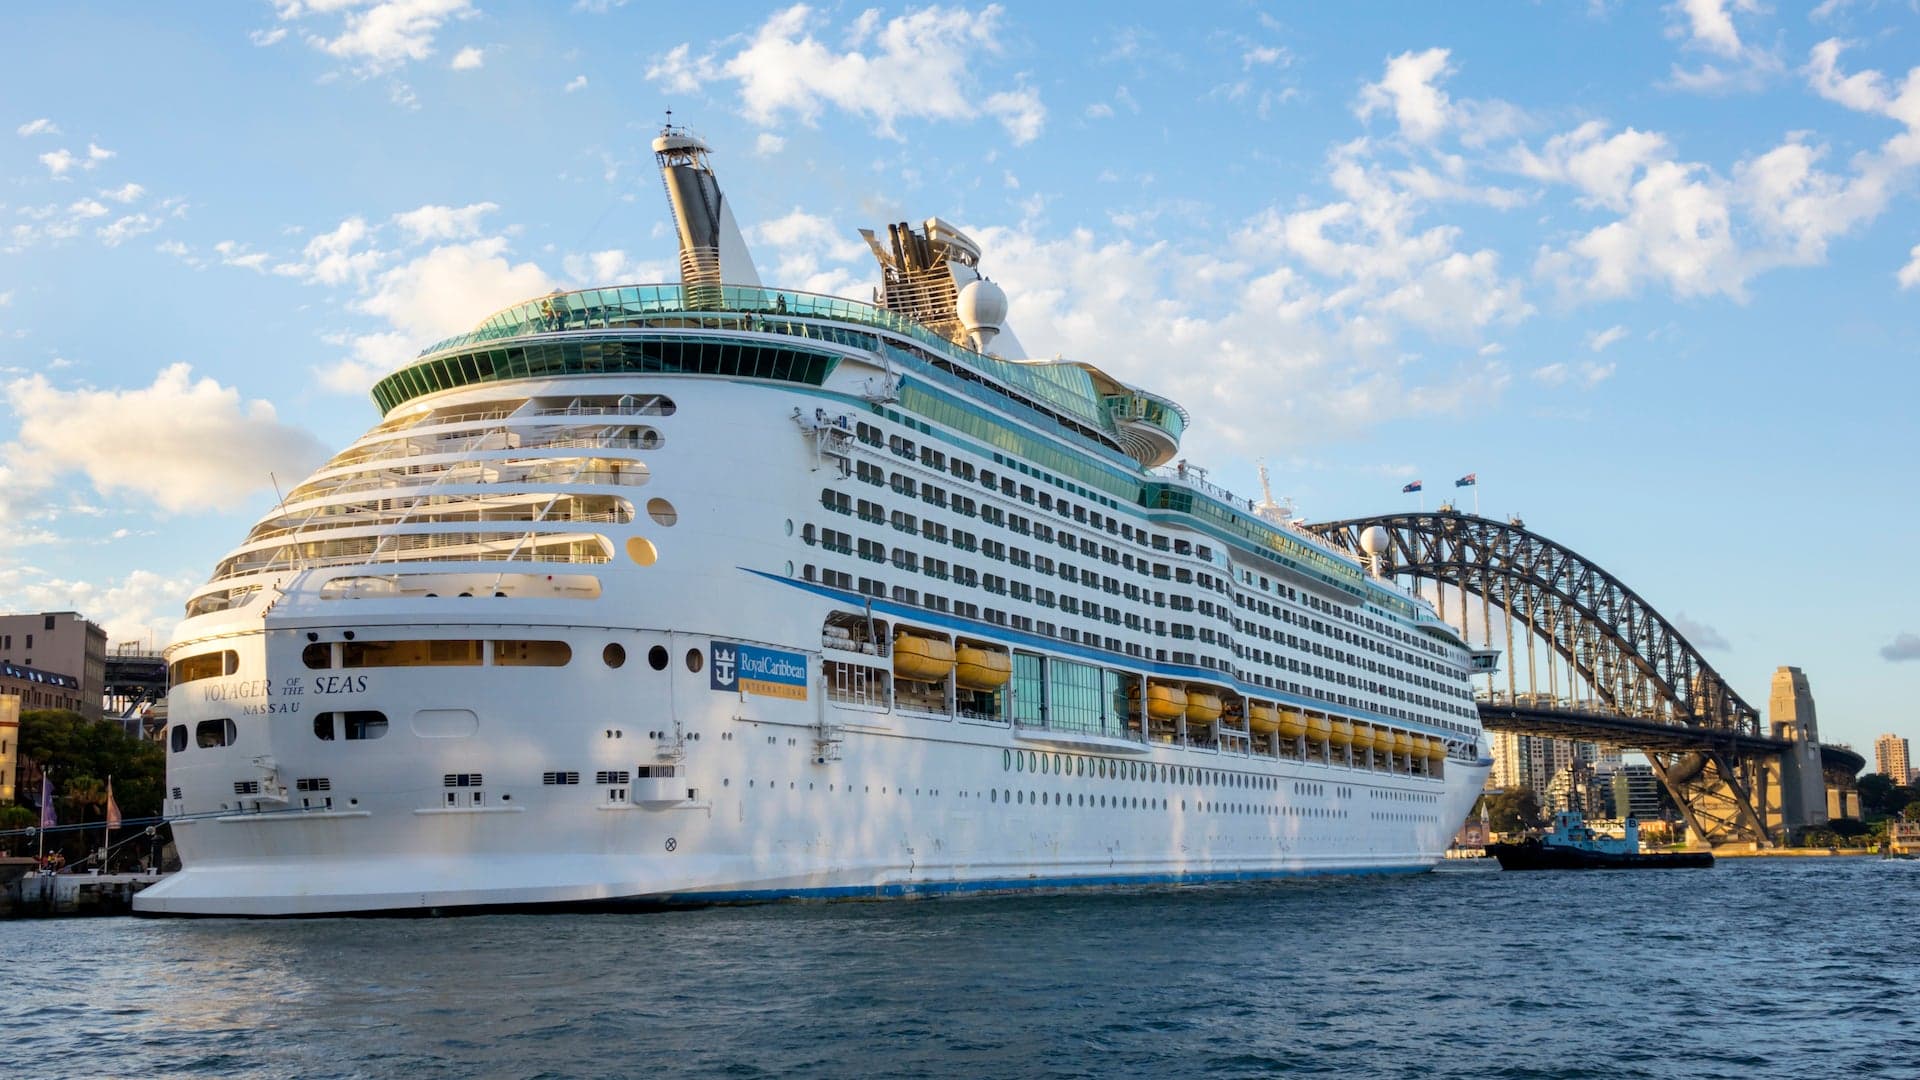 Cruise Passengers Receive Full Refunds After Company’s Drunken Work Conference Ruins Trip